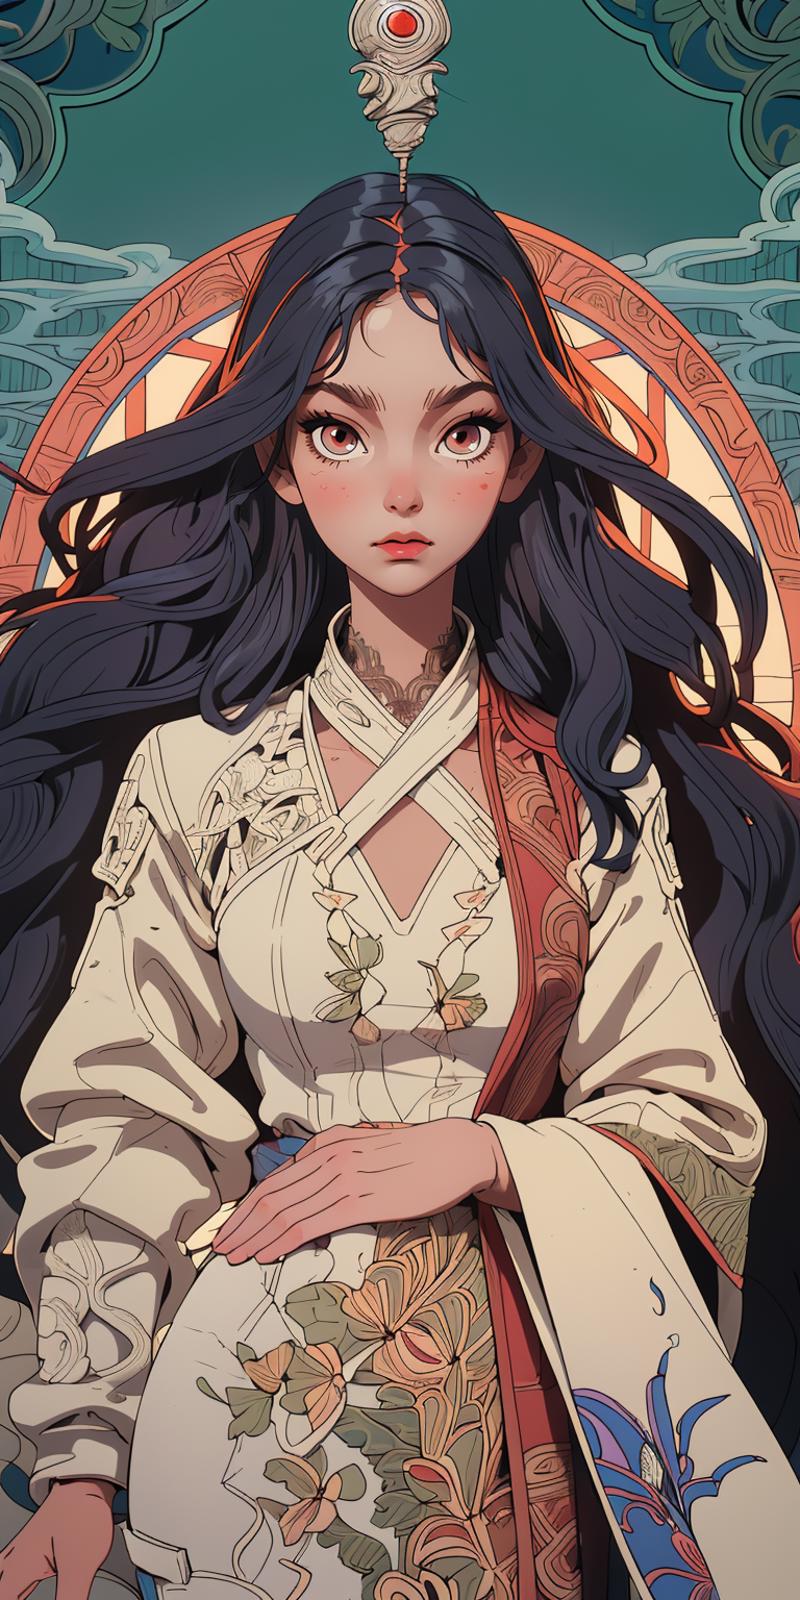 Anime Art of an Asian Woman in a Floral Dress with Flowing Hair and Red Lips.